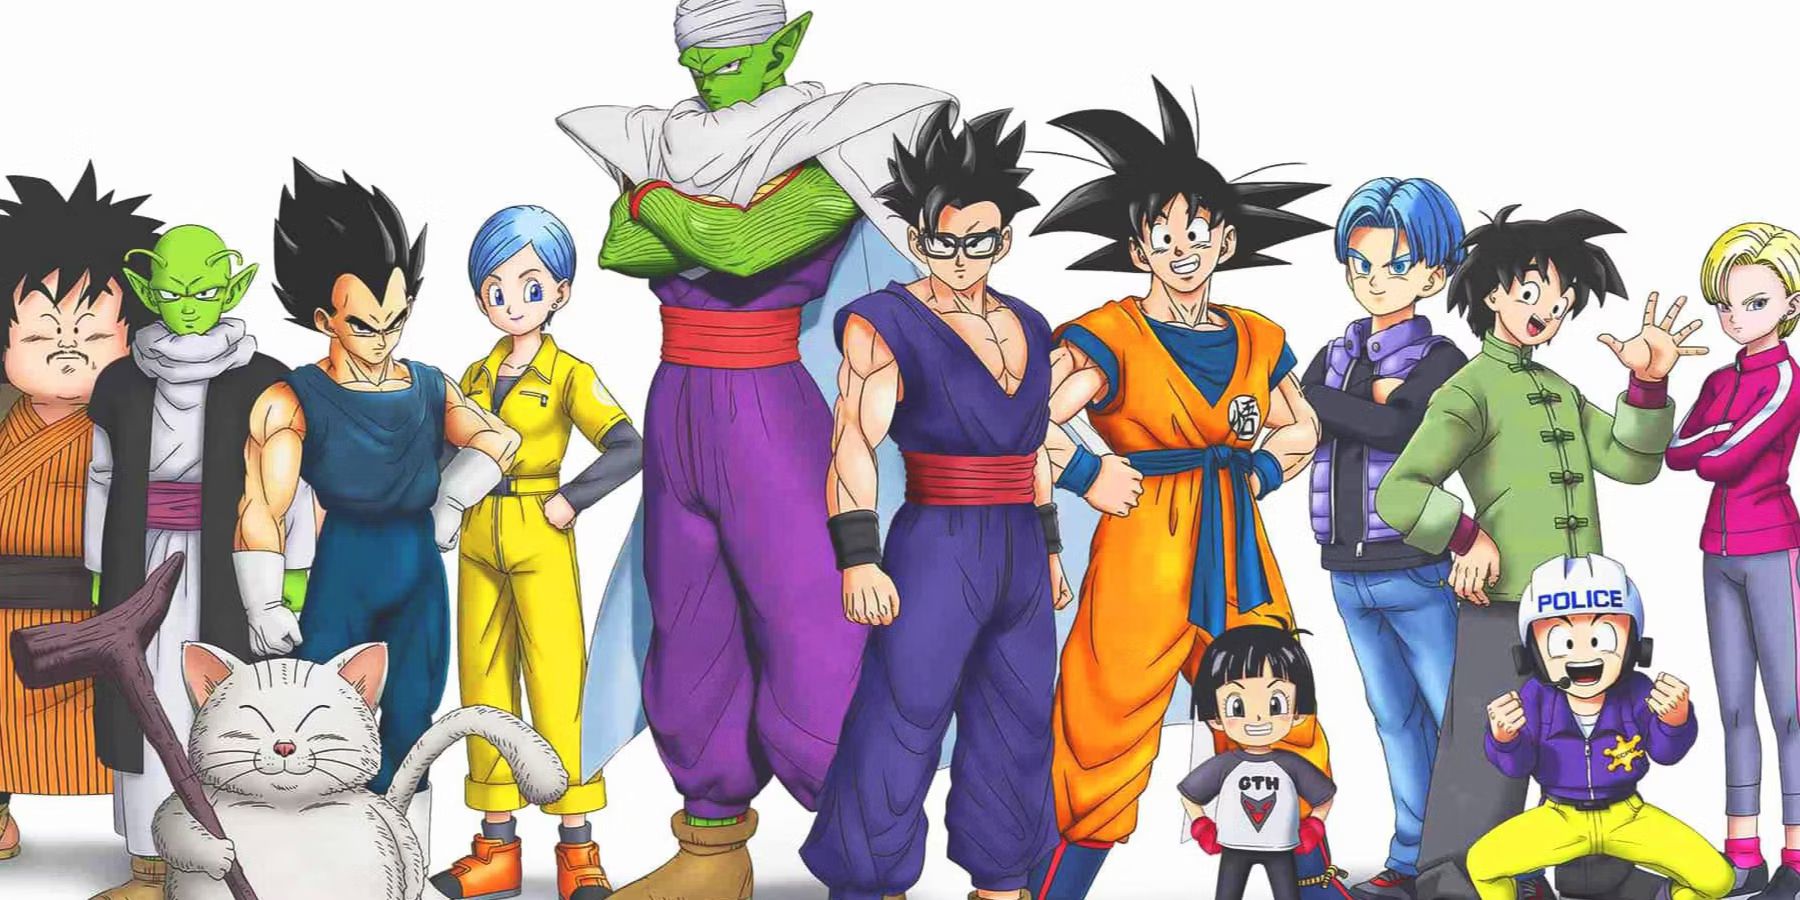 Promotional image for Dragon Ball Super shows the cast of characters including Goku, Vegeta, Piccolo, Gohan, and more standing in a line with a while background.